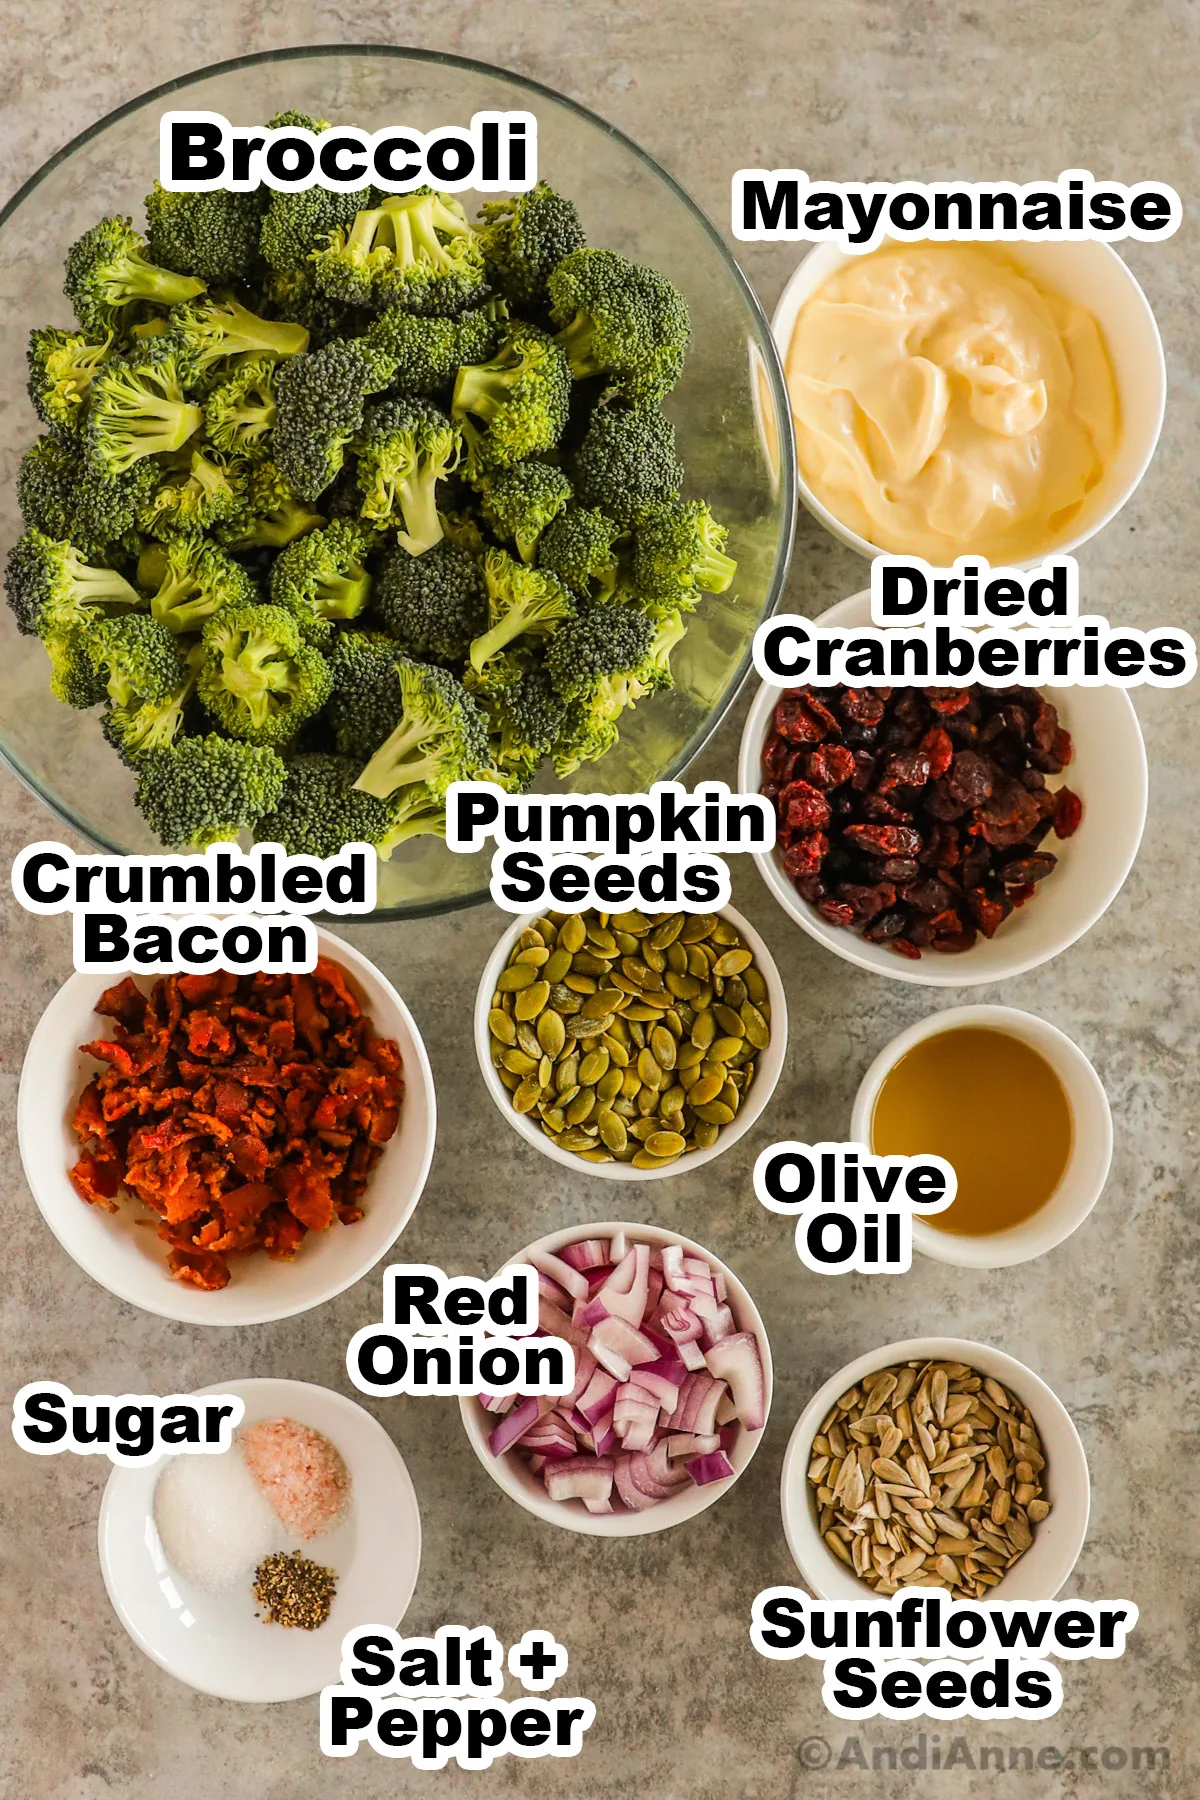 Recipe ingredients in bowls including broccoli florets, bowl of mayonnaise, dried cranberries, crumbled bacon, seeds, olive oil, red onion, salt and pepper.